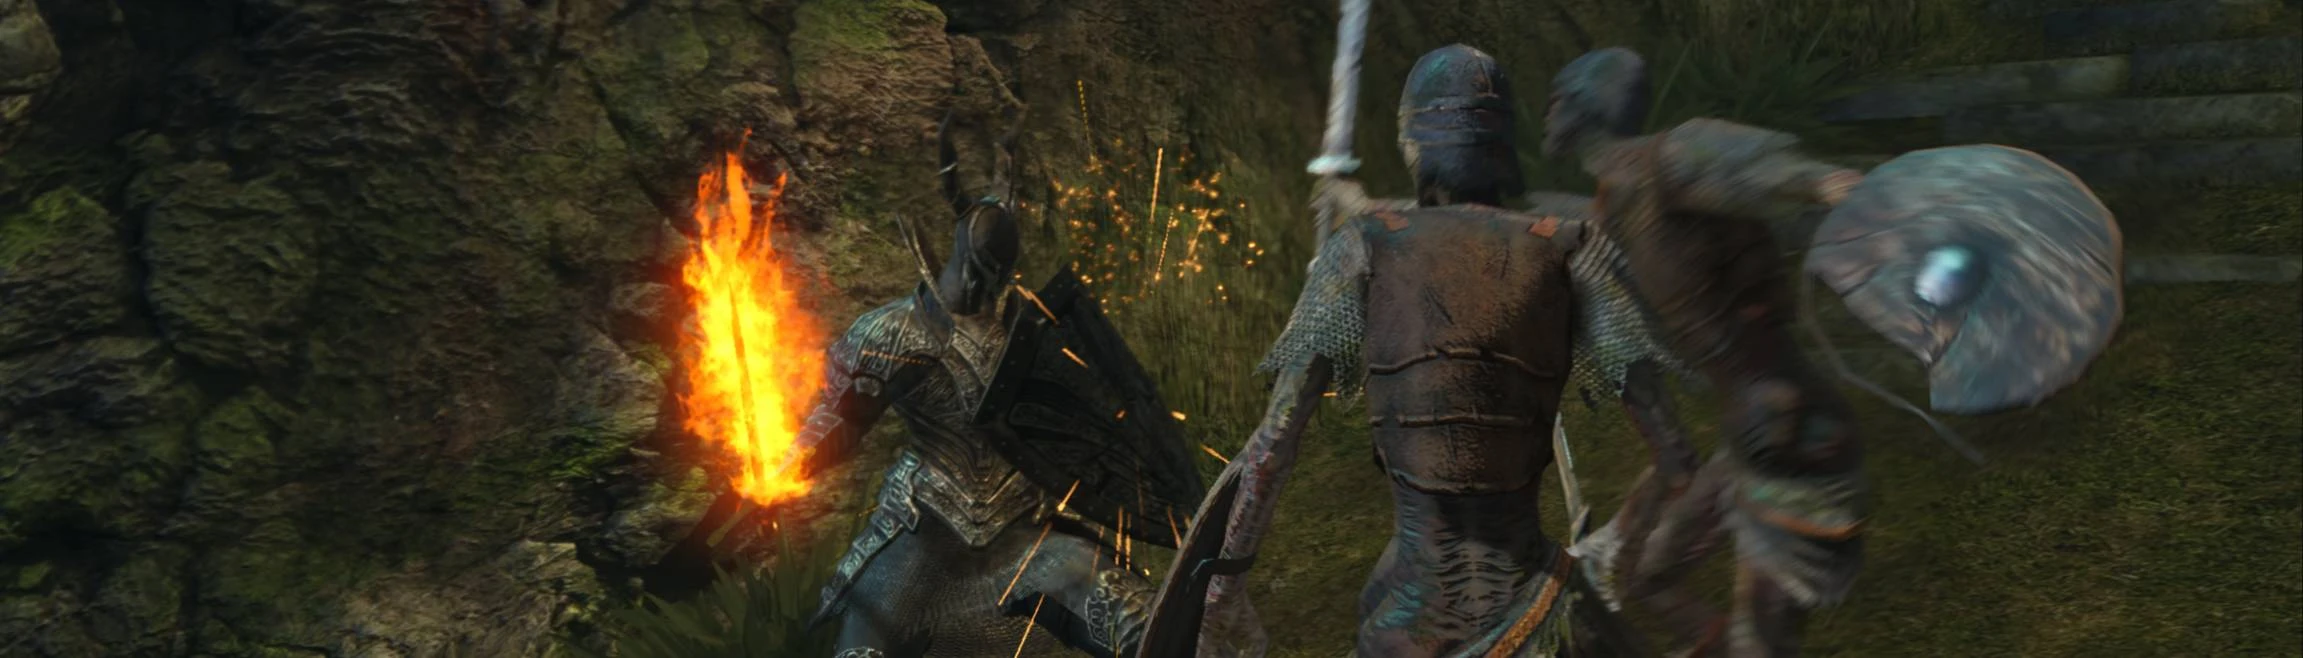 Massive new Dark Souls modding tool is an absolute game changer